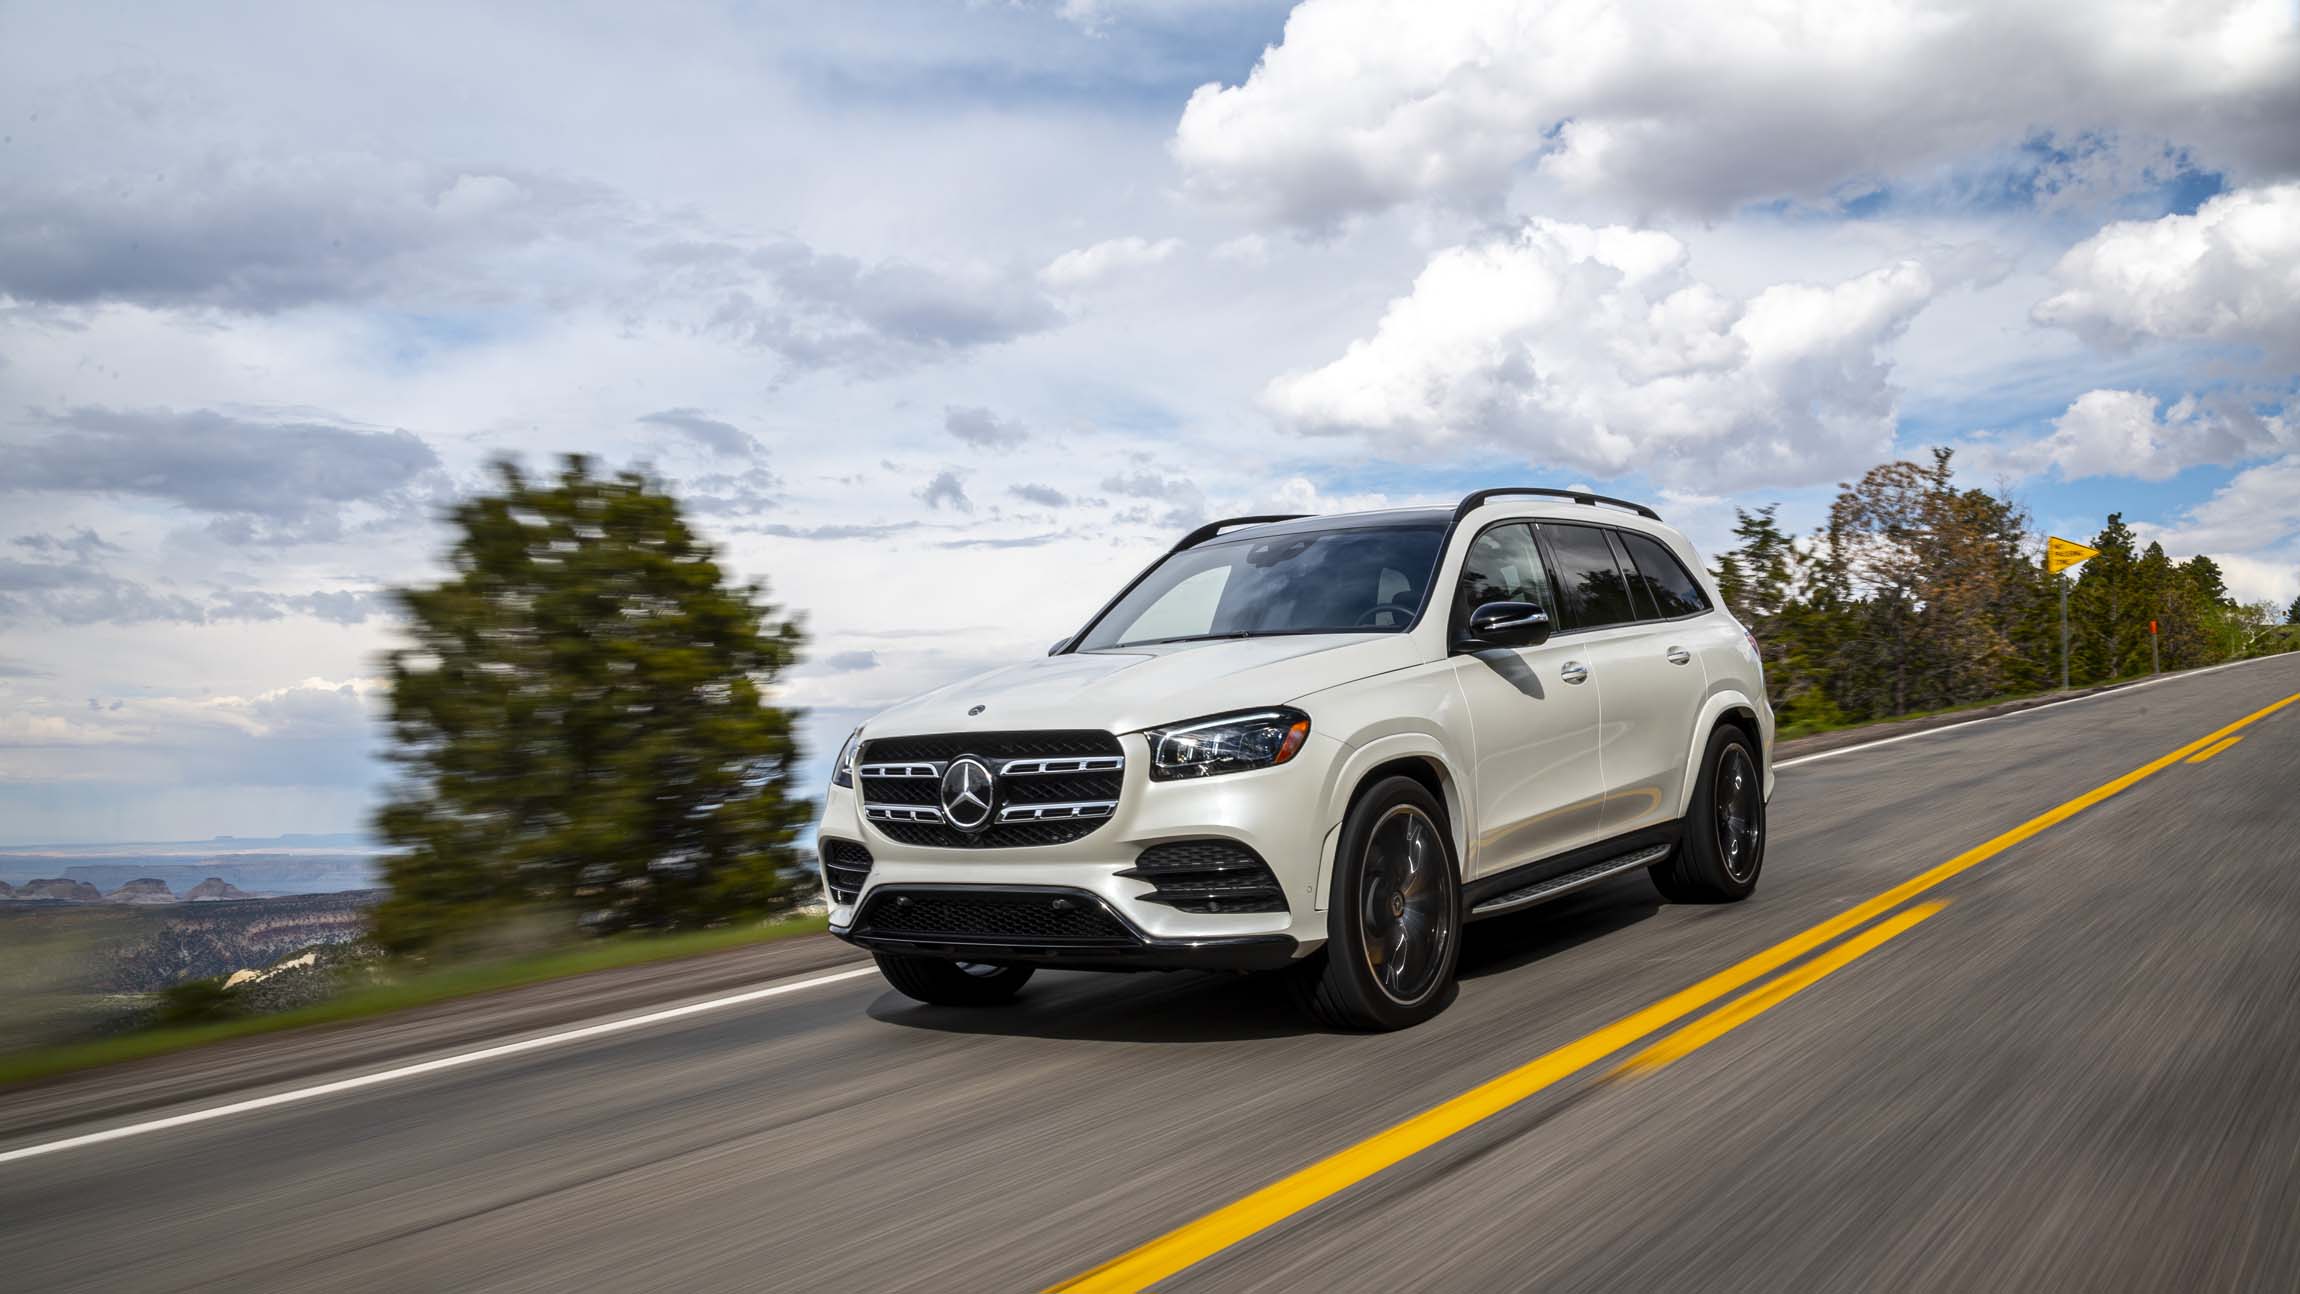 Mercedes Benz Gls Class Review Ratings Specs Prices And Photos The Car Connection